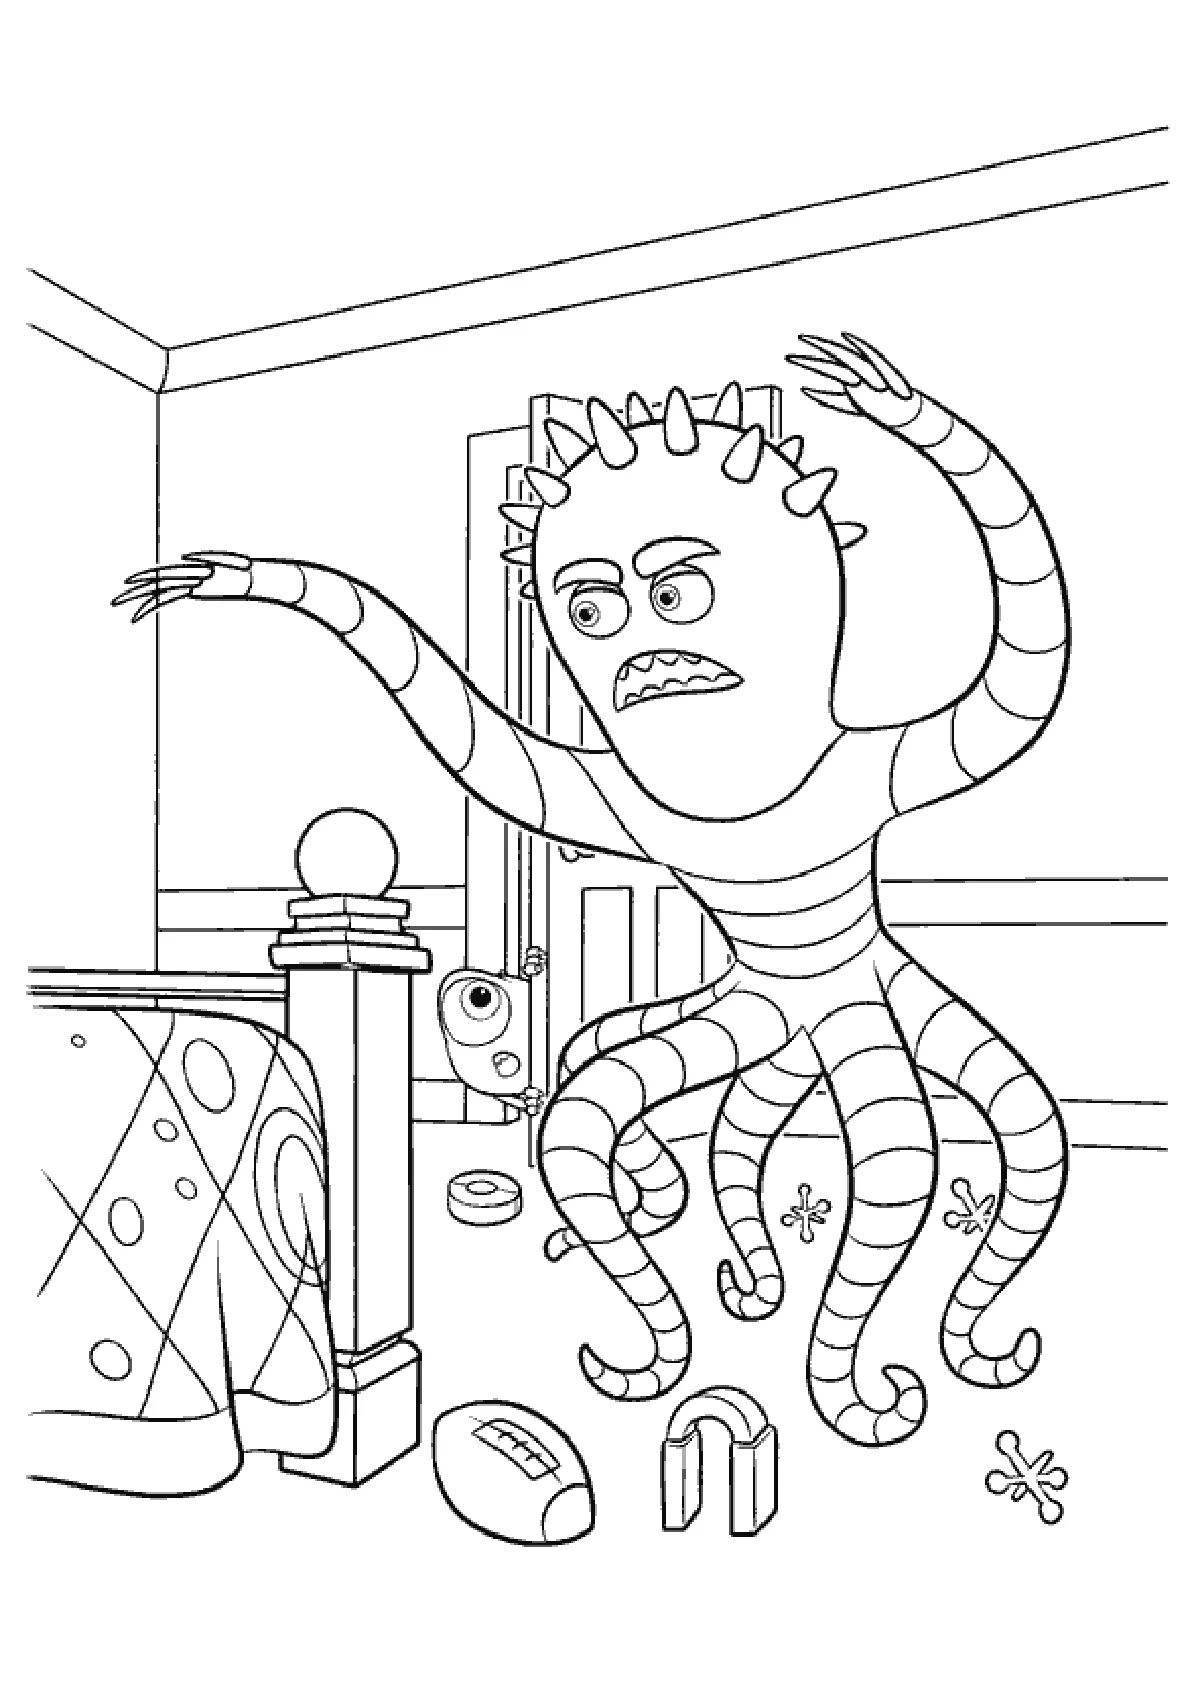 Coloring page of impressive monsters university